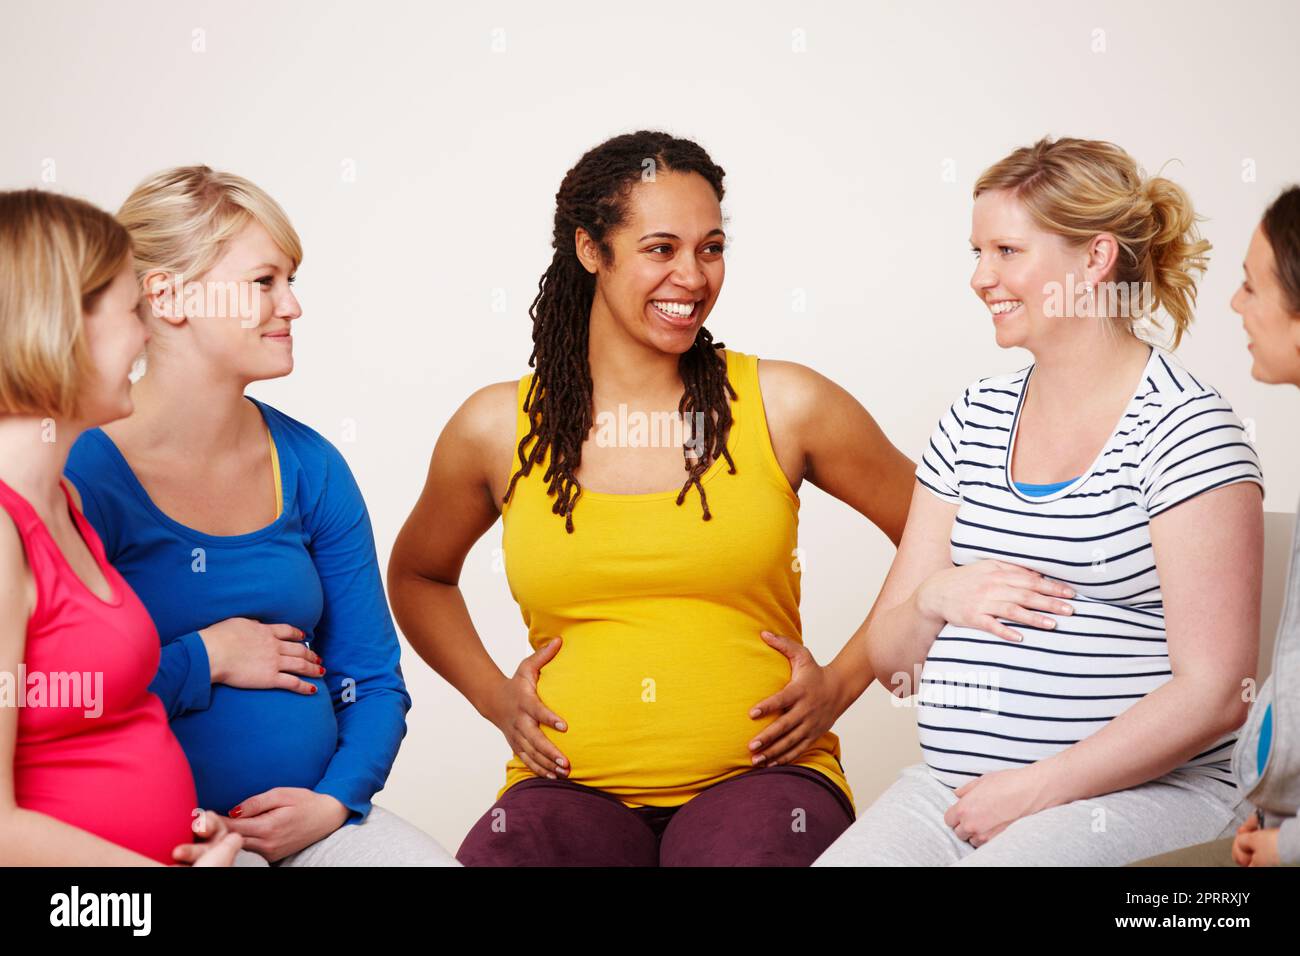 Supporting each other throughout their pregnancies. A multi-ethnic group of pregnant women smiling while sitting together in a circle. Stock Photo